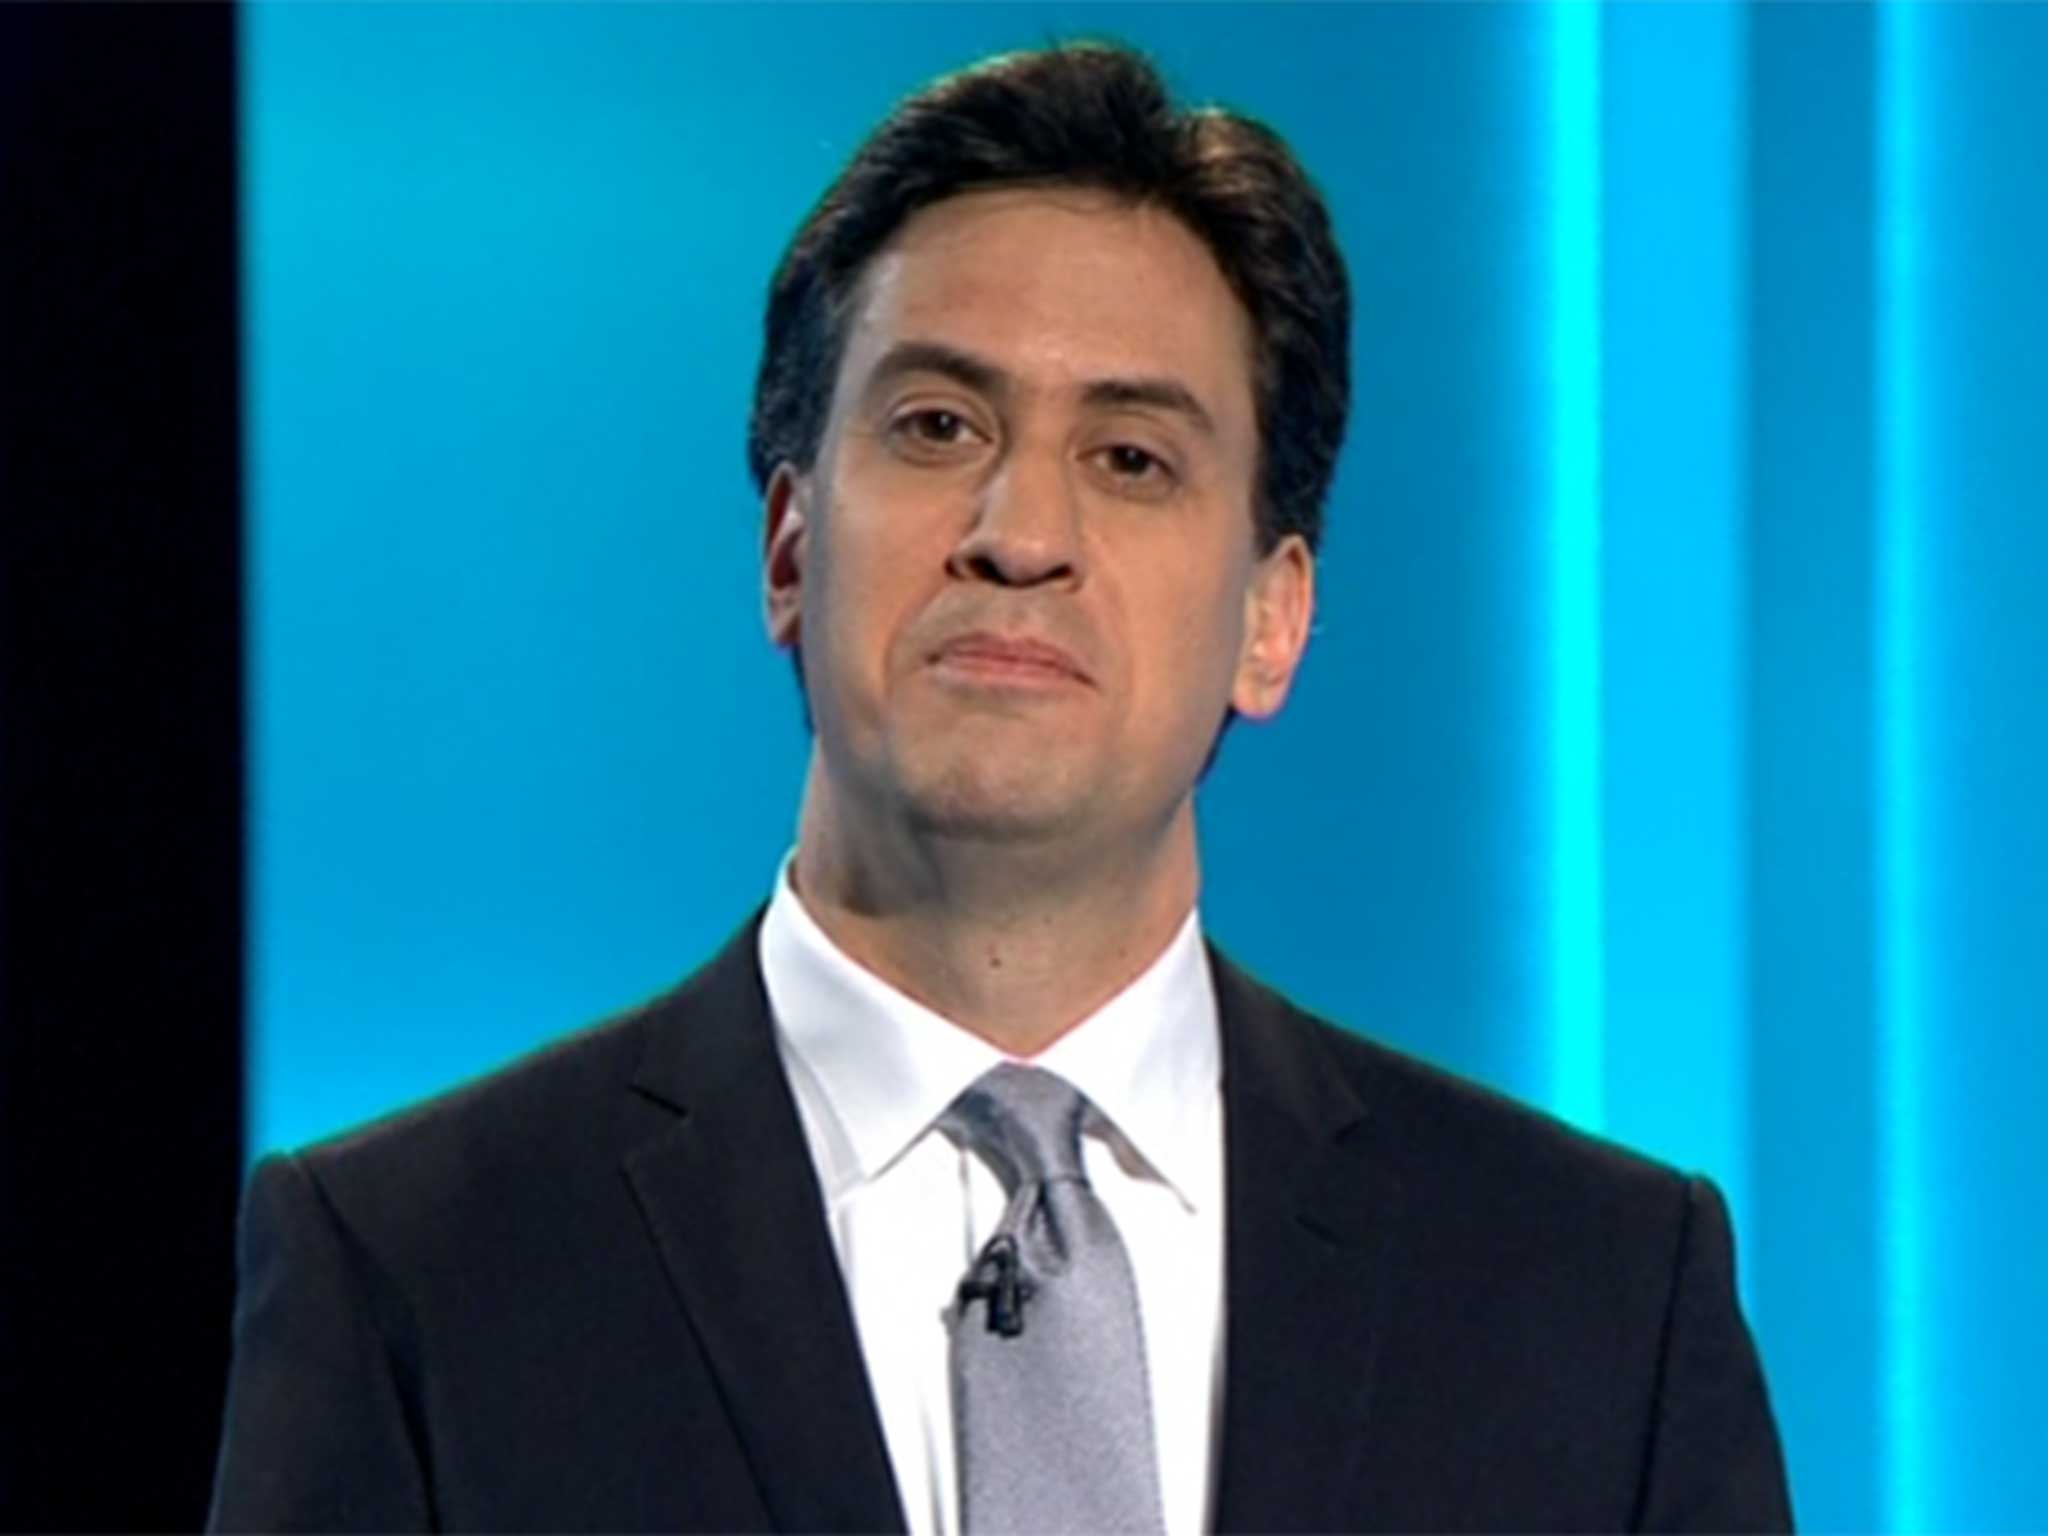 Labour aides insist the Tory strategy of portraying Mr Miliband as unfit for the job has failed; he is very much in the game